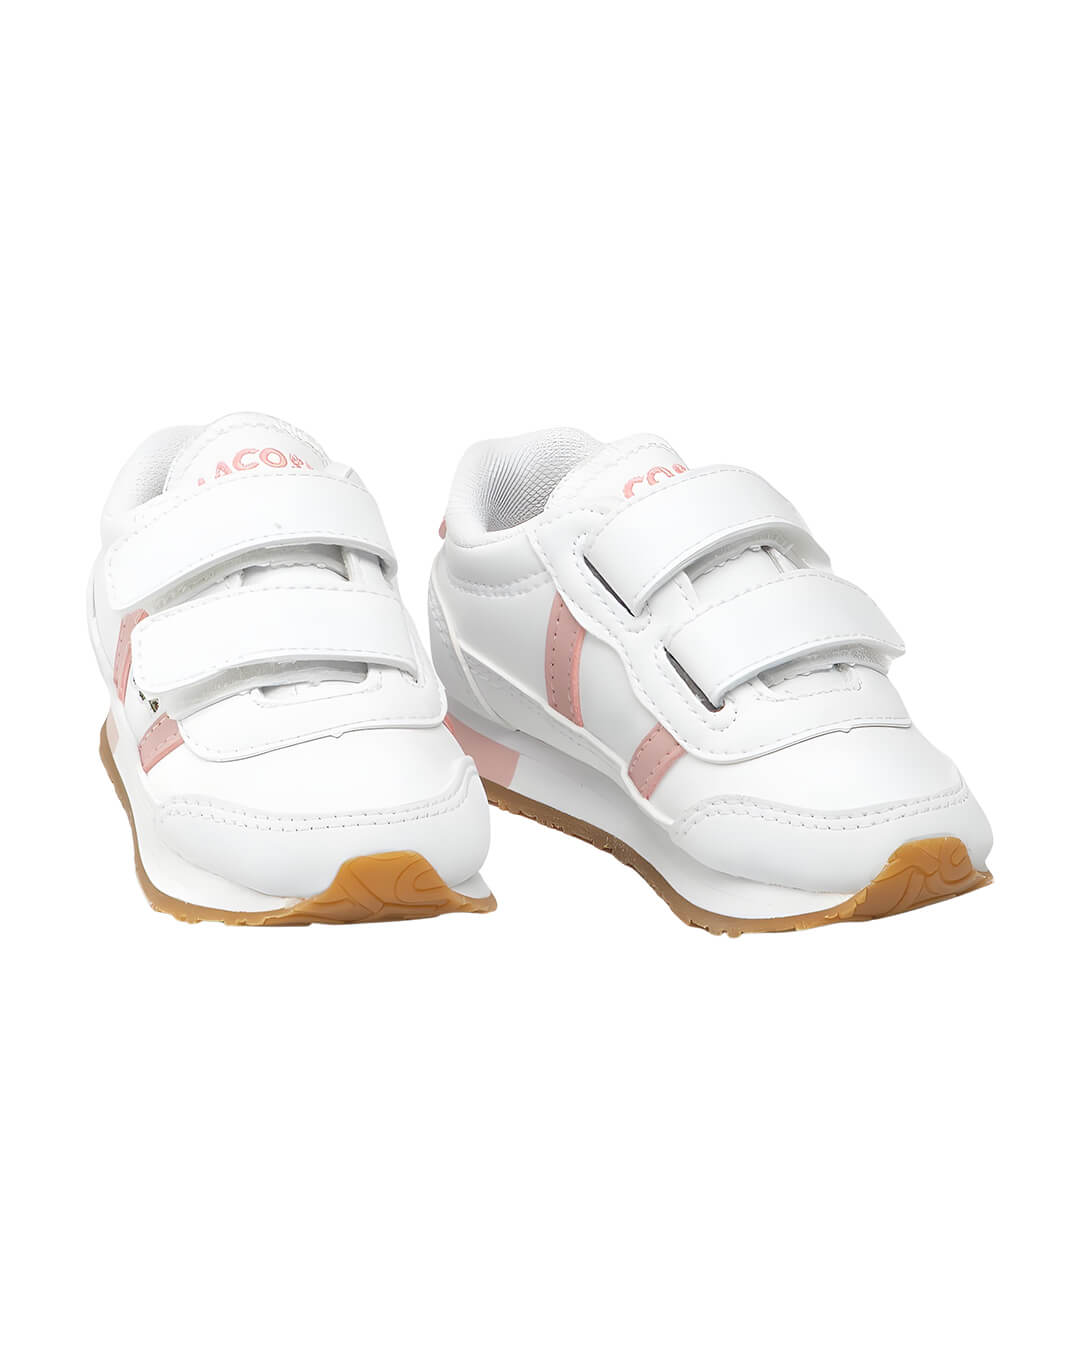 Lacoste Shoes Girls Lacoste Velcro Strap White Sneakers